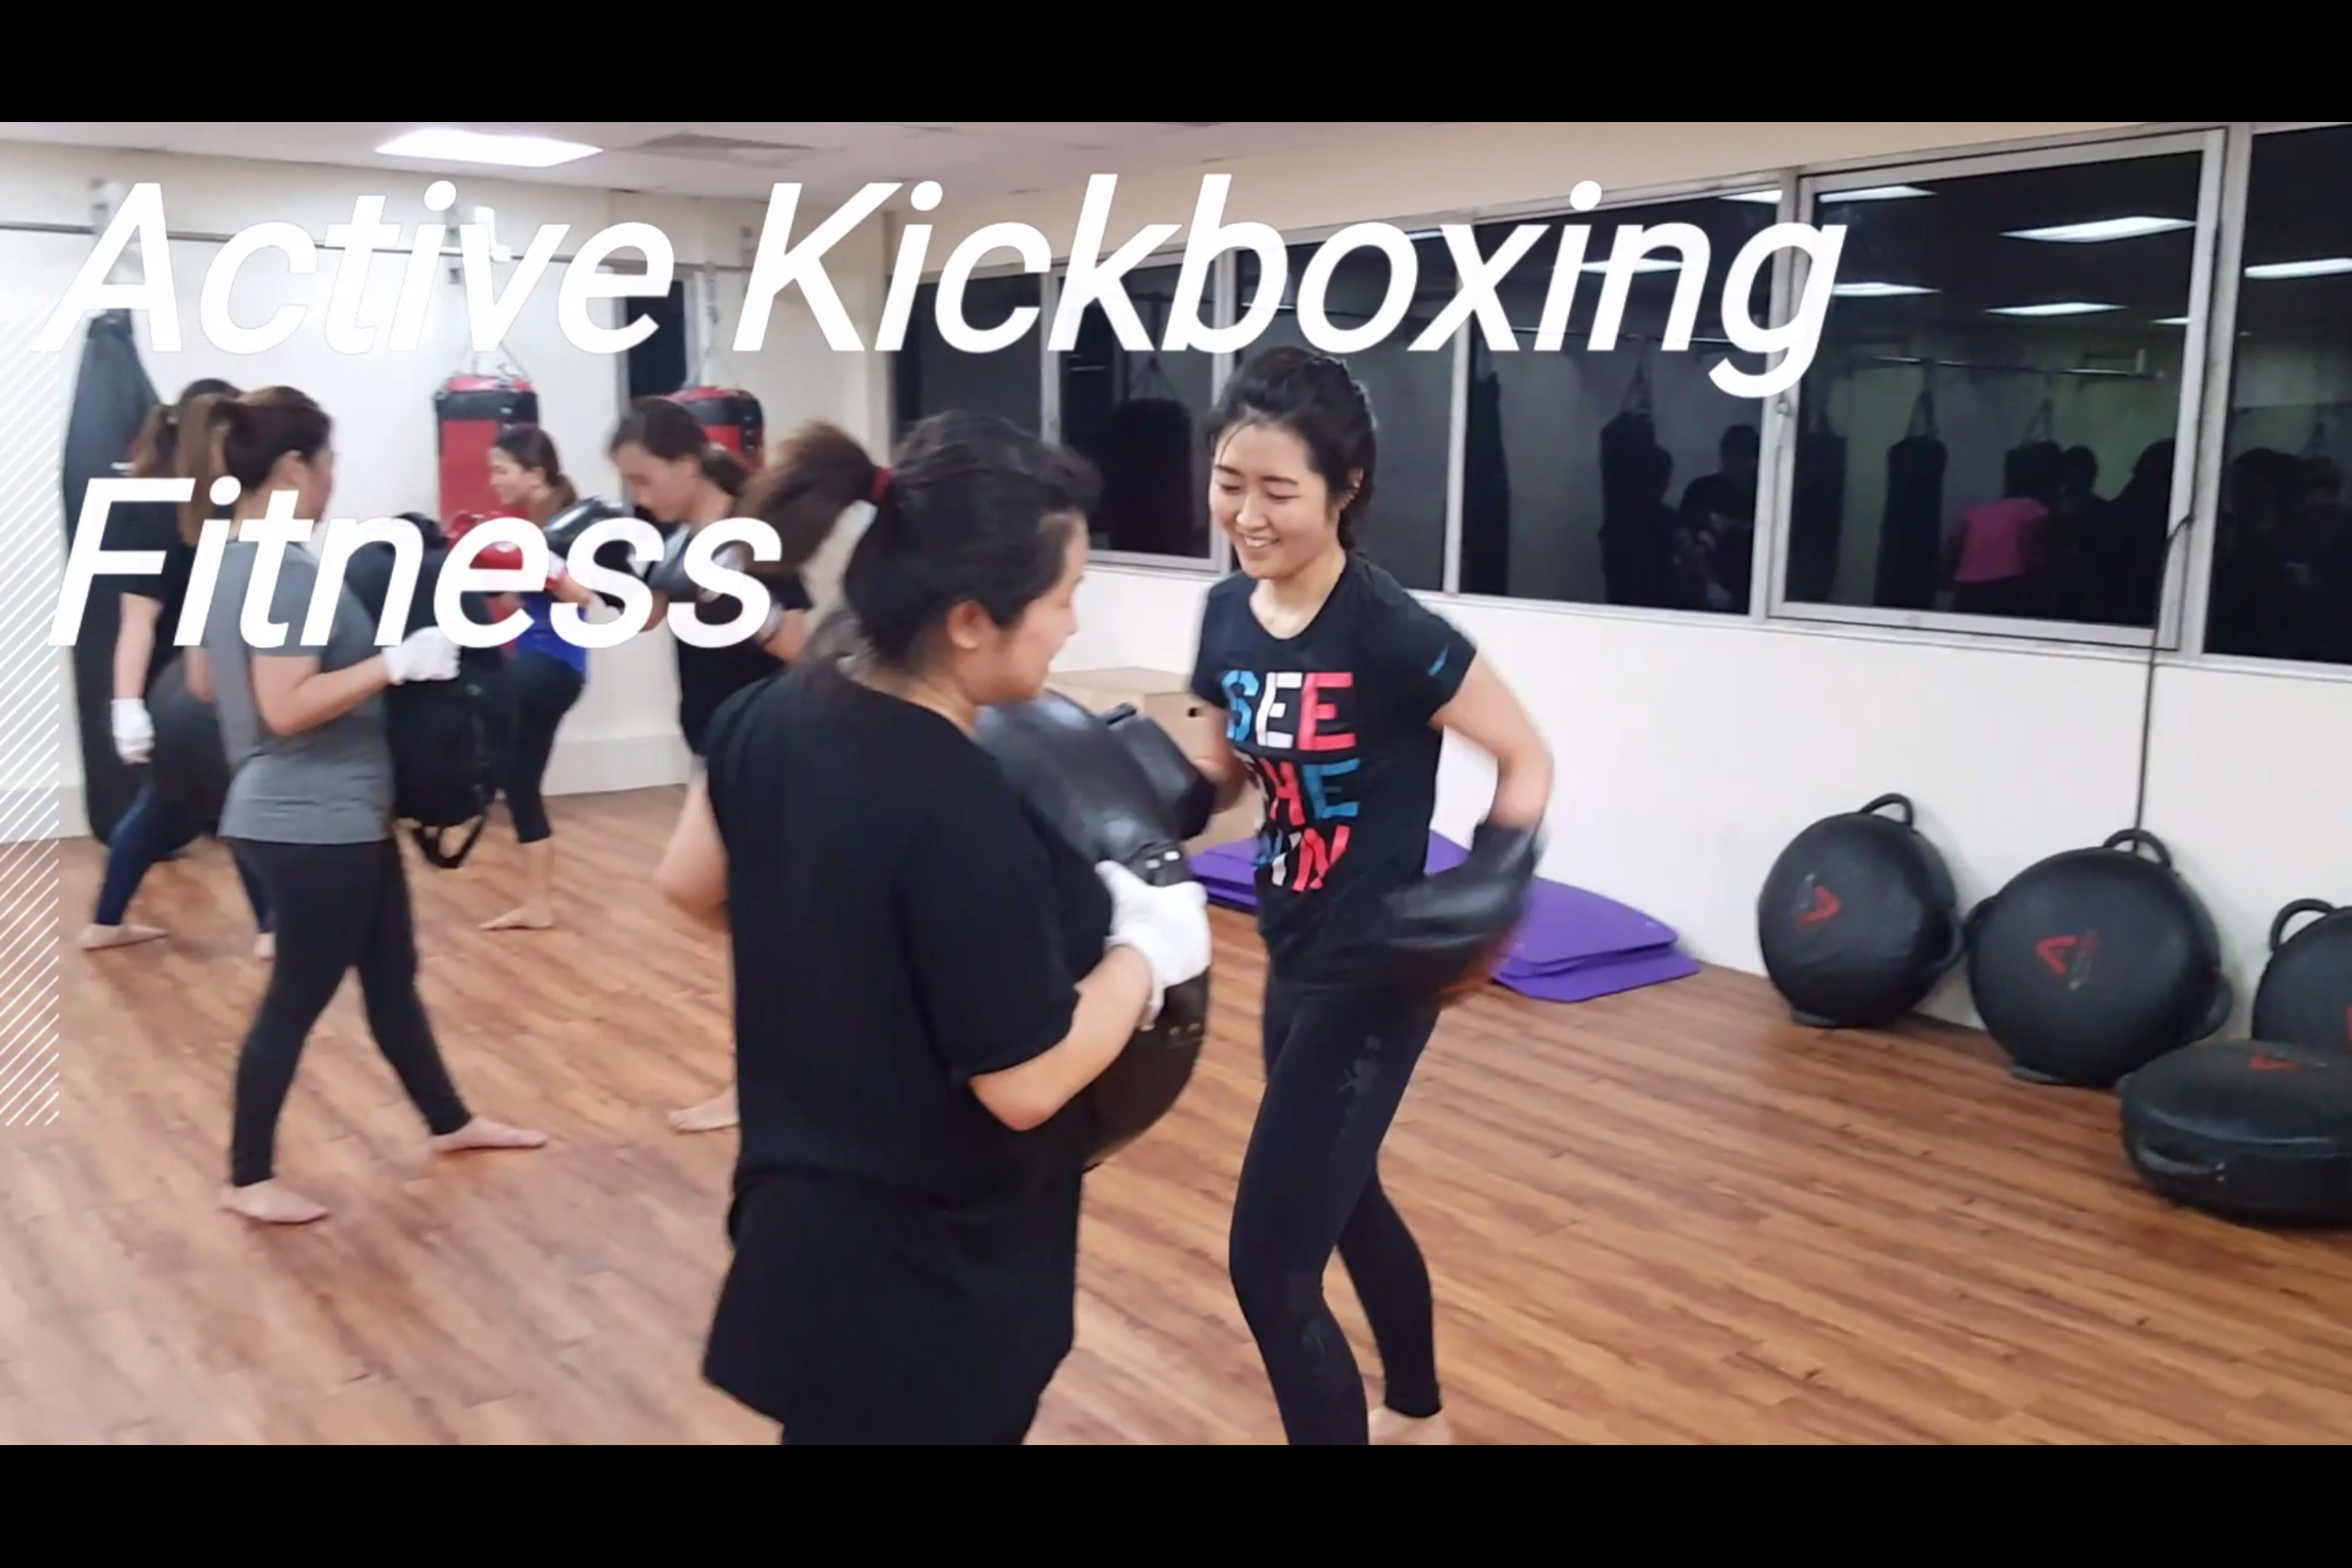 Women Only Kickboxing Fitness - Tone Your Body Up